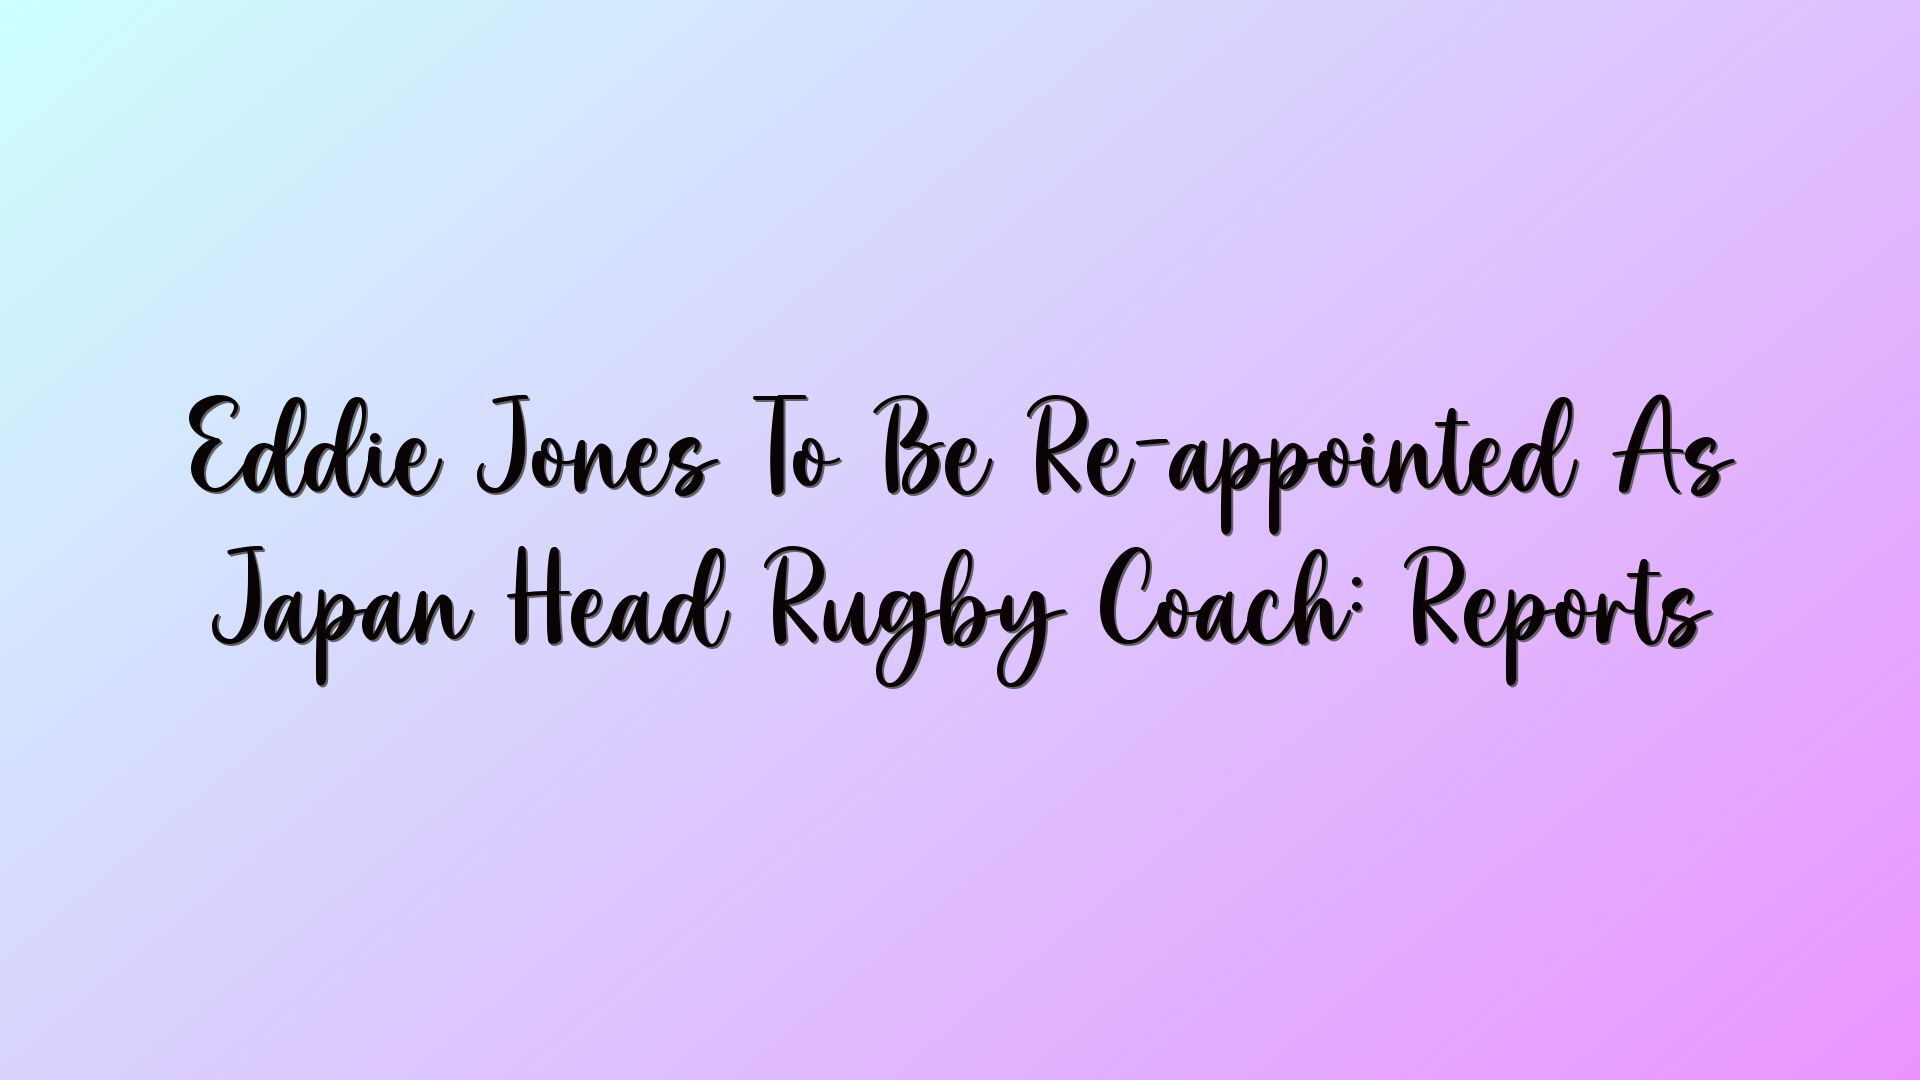 Eddie Jones To Be Re-appointed As Japan Head Rugby Coach: Reports